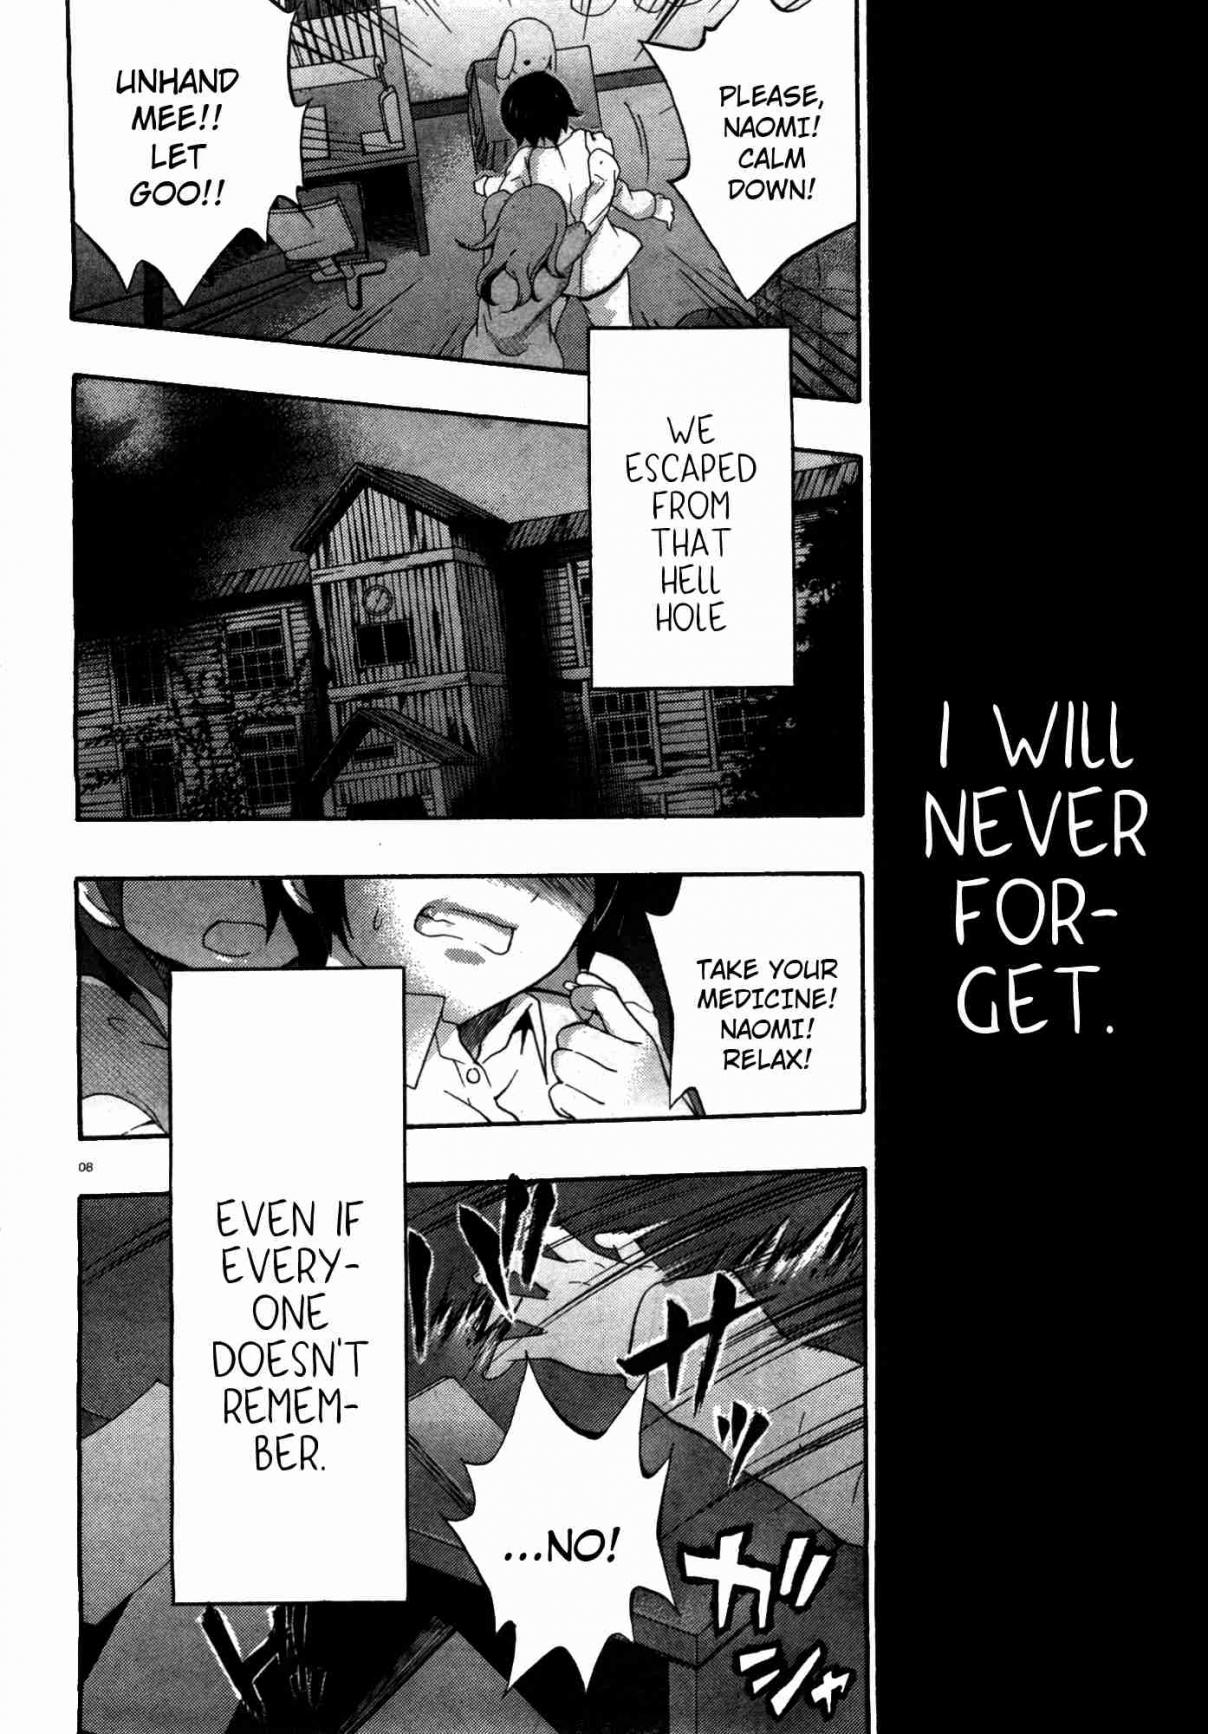 Corpse Party Book of Shadows Vol. 1 Ch. 0 Prologue